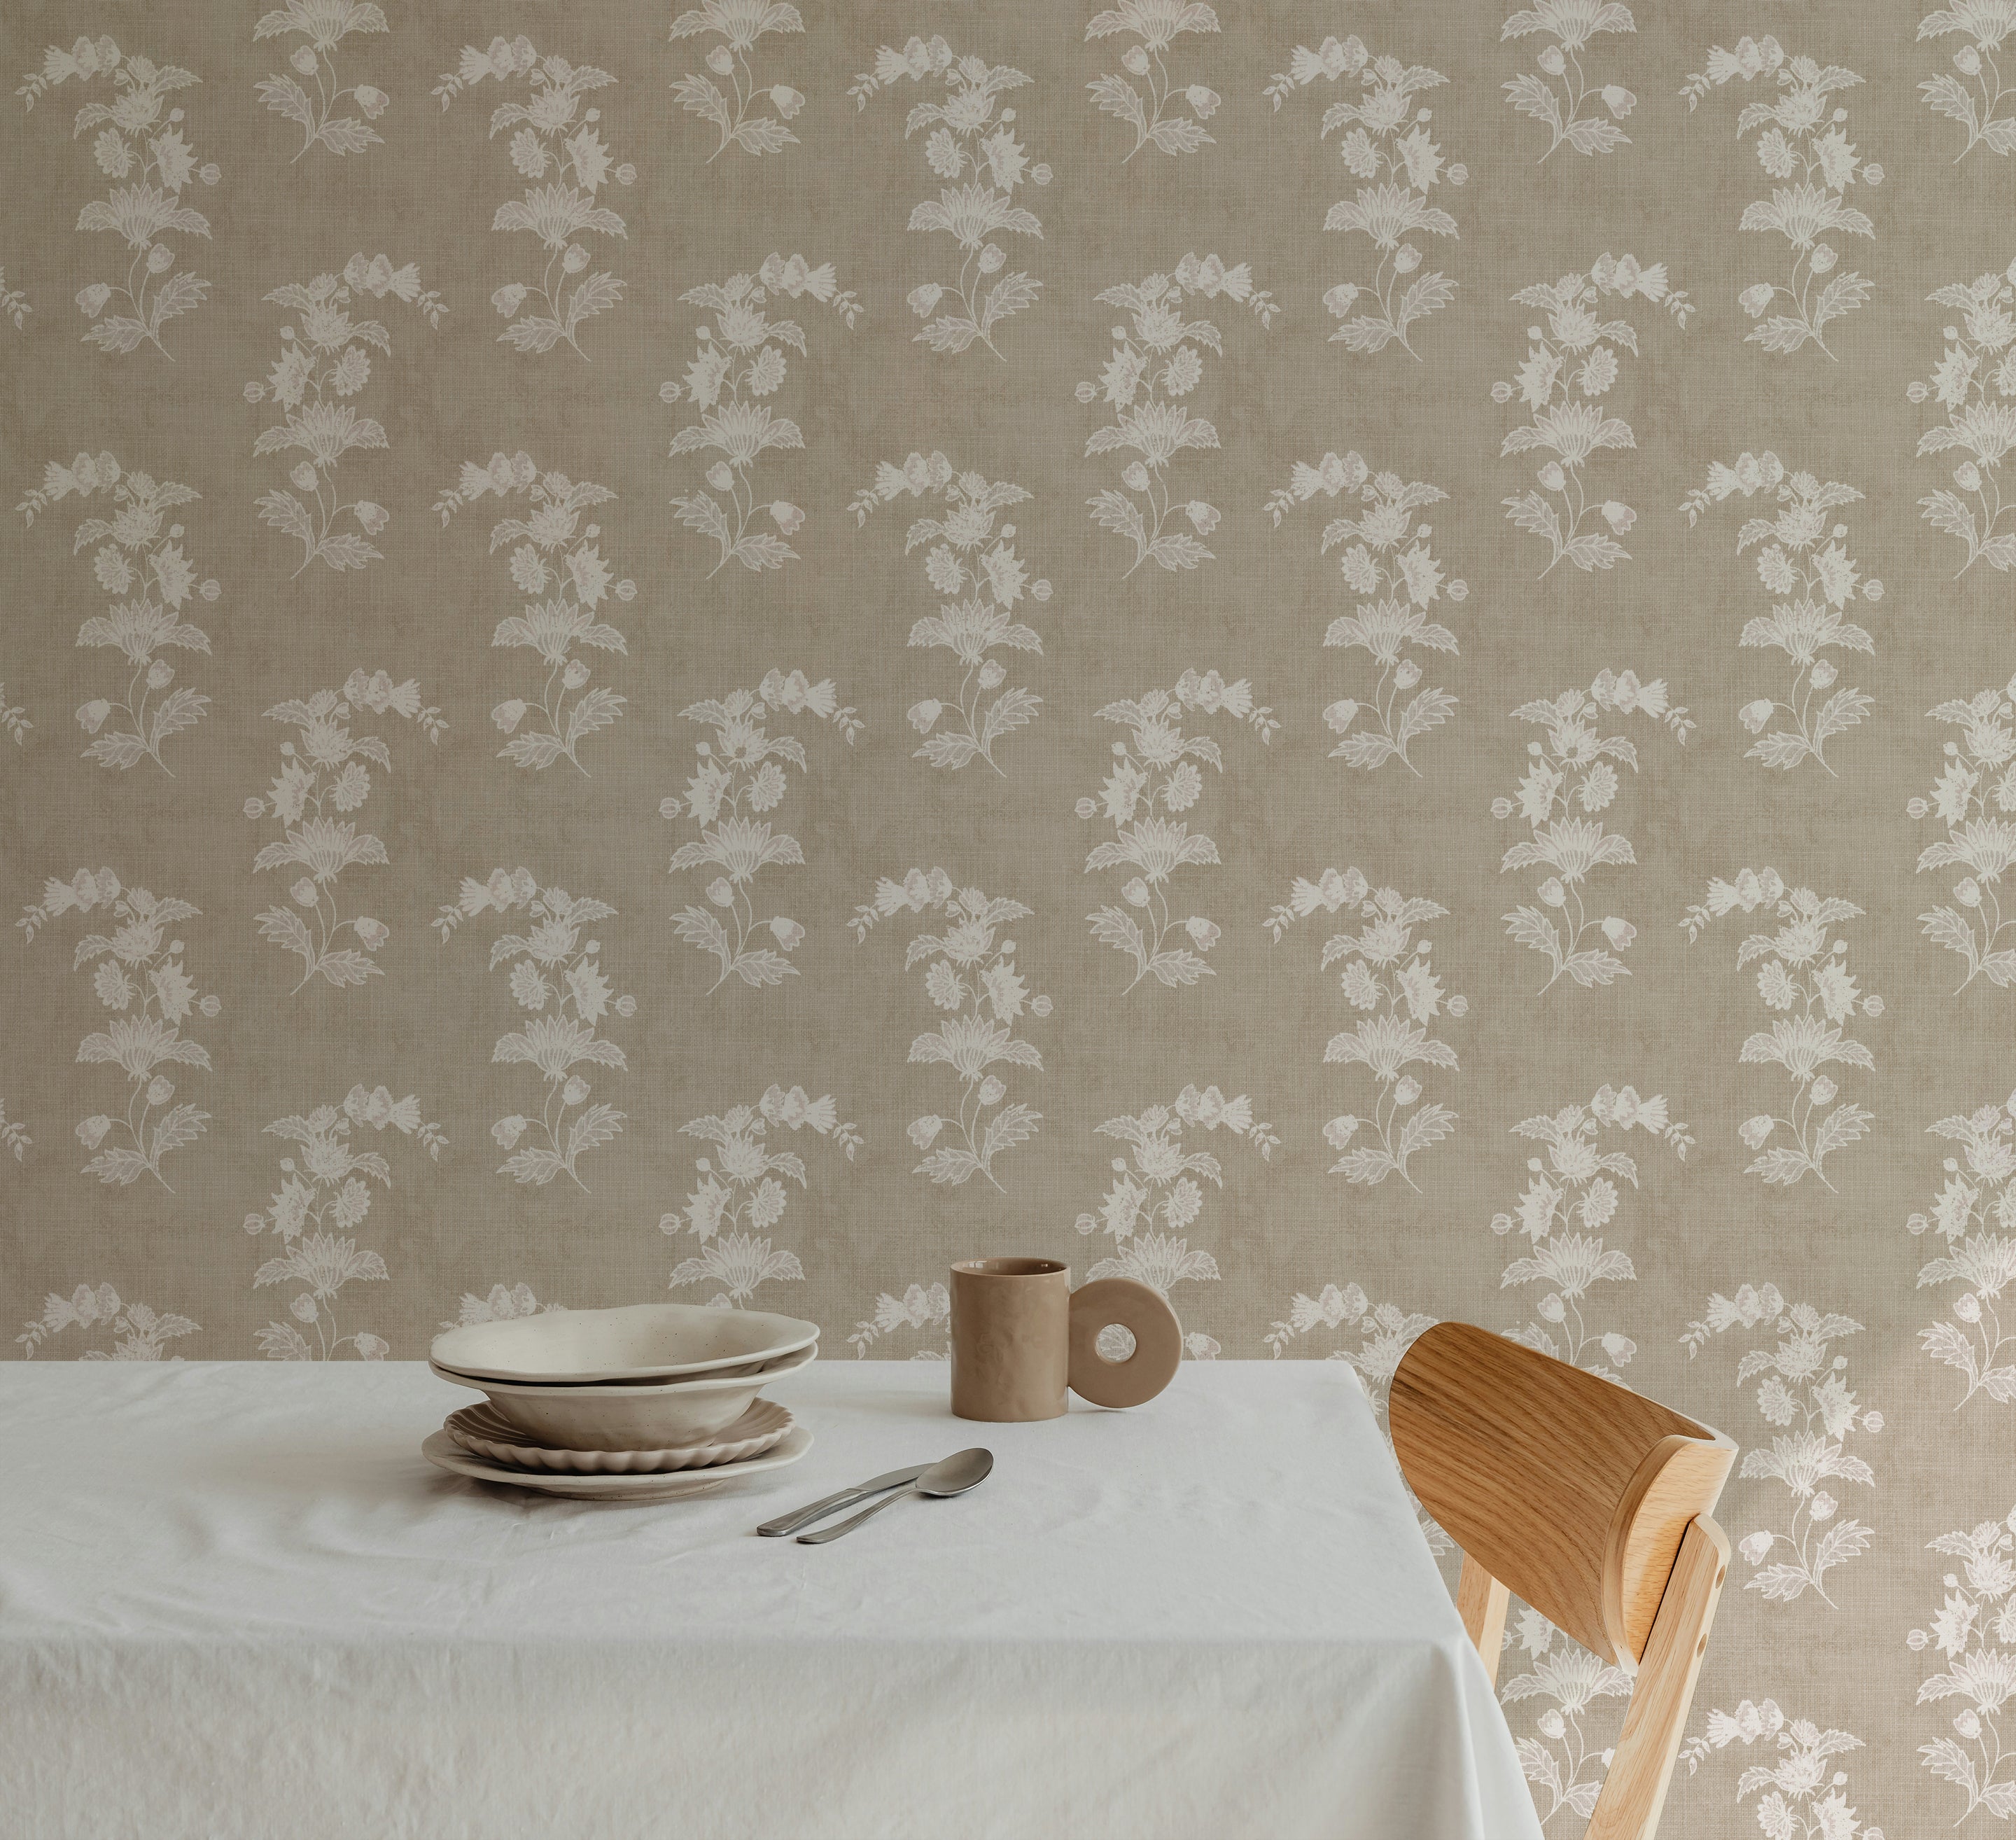 A dining setup featuring a simple white tablecloth and minimalist tableware on a rustic wooden table, set against a backdrop of a wall covered in a floral chintz wallpaper with white blossoms on a linen background, creating a serene dining atmosphere